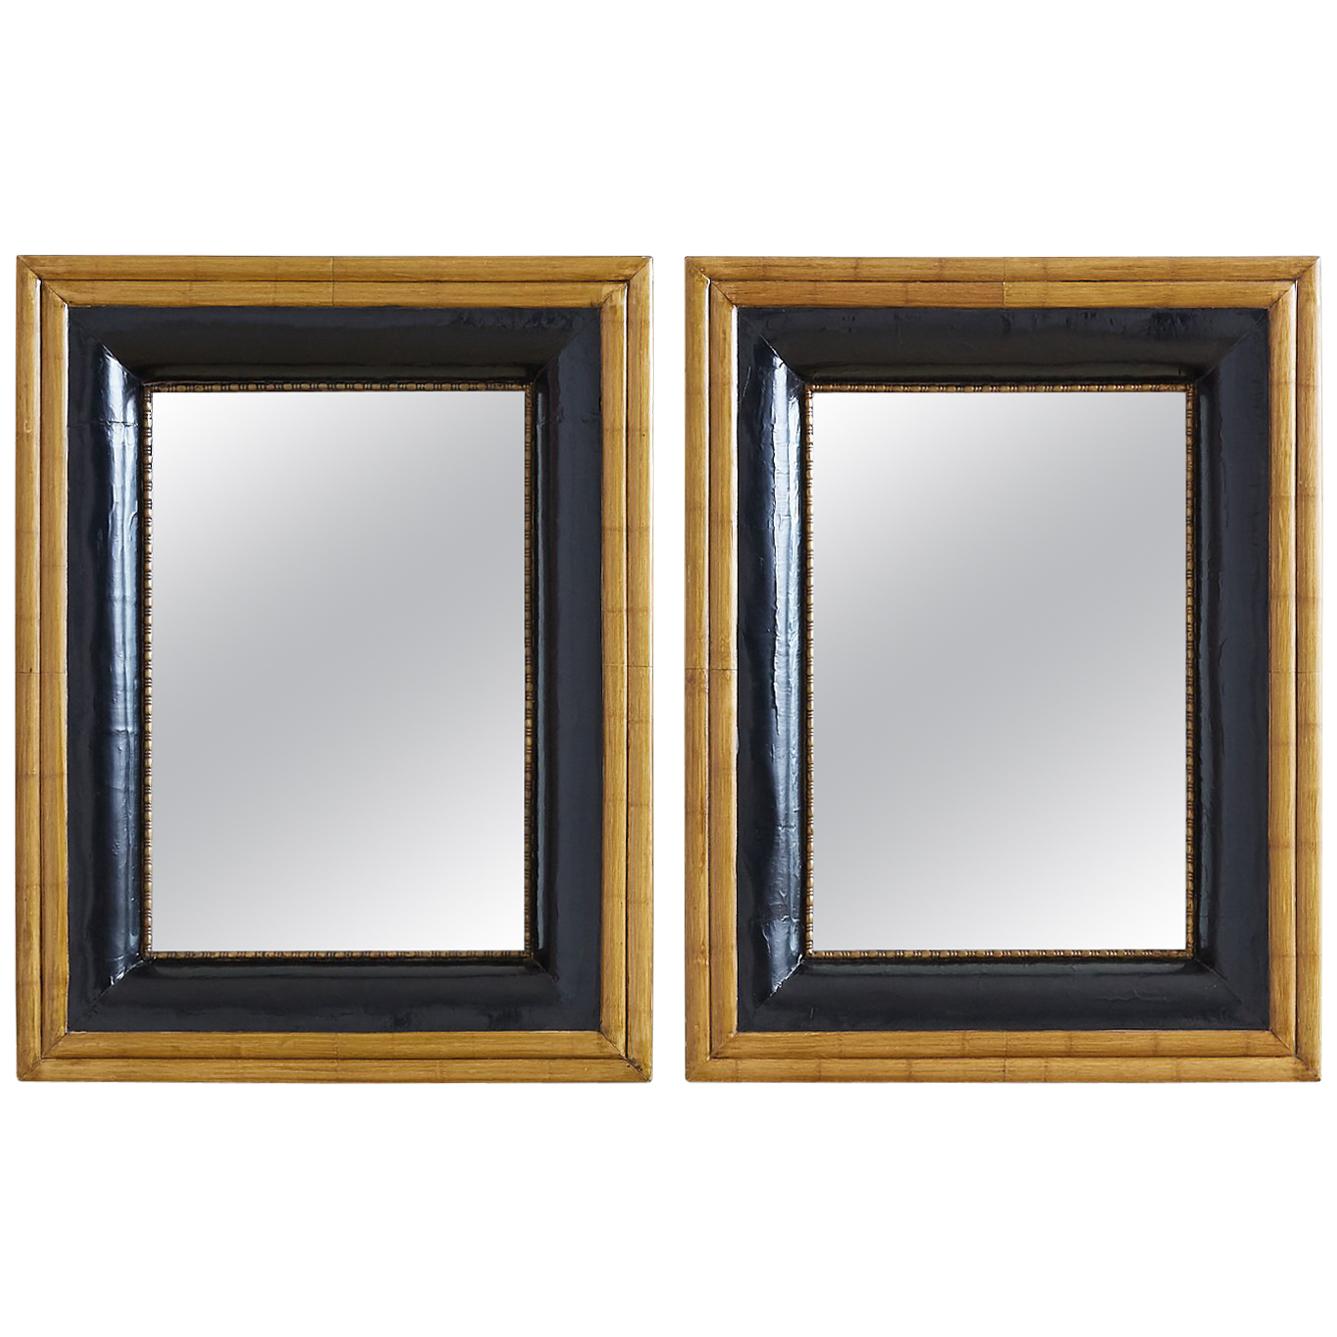 Pair of Portuguese Mirrors with Faux Bamboo Trim